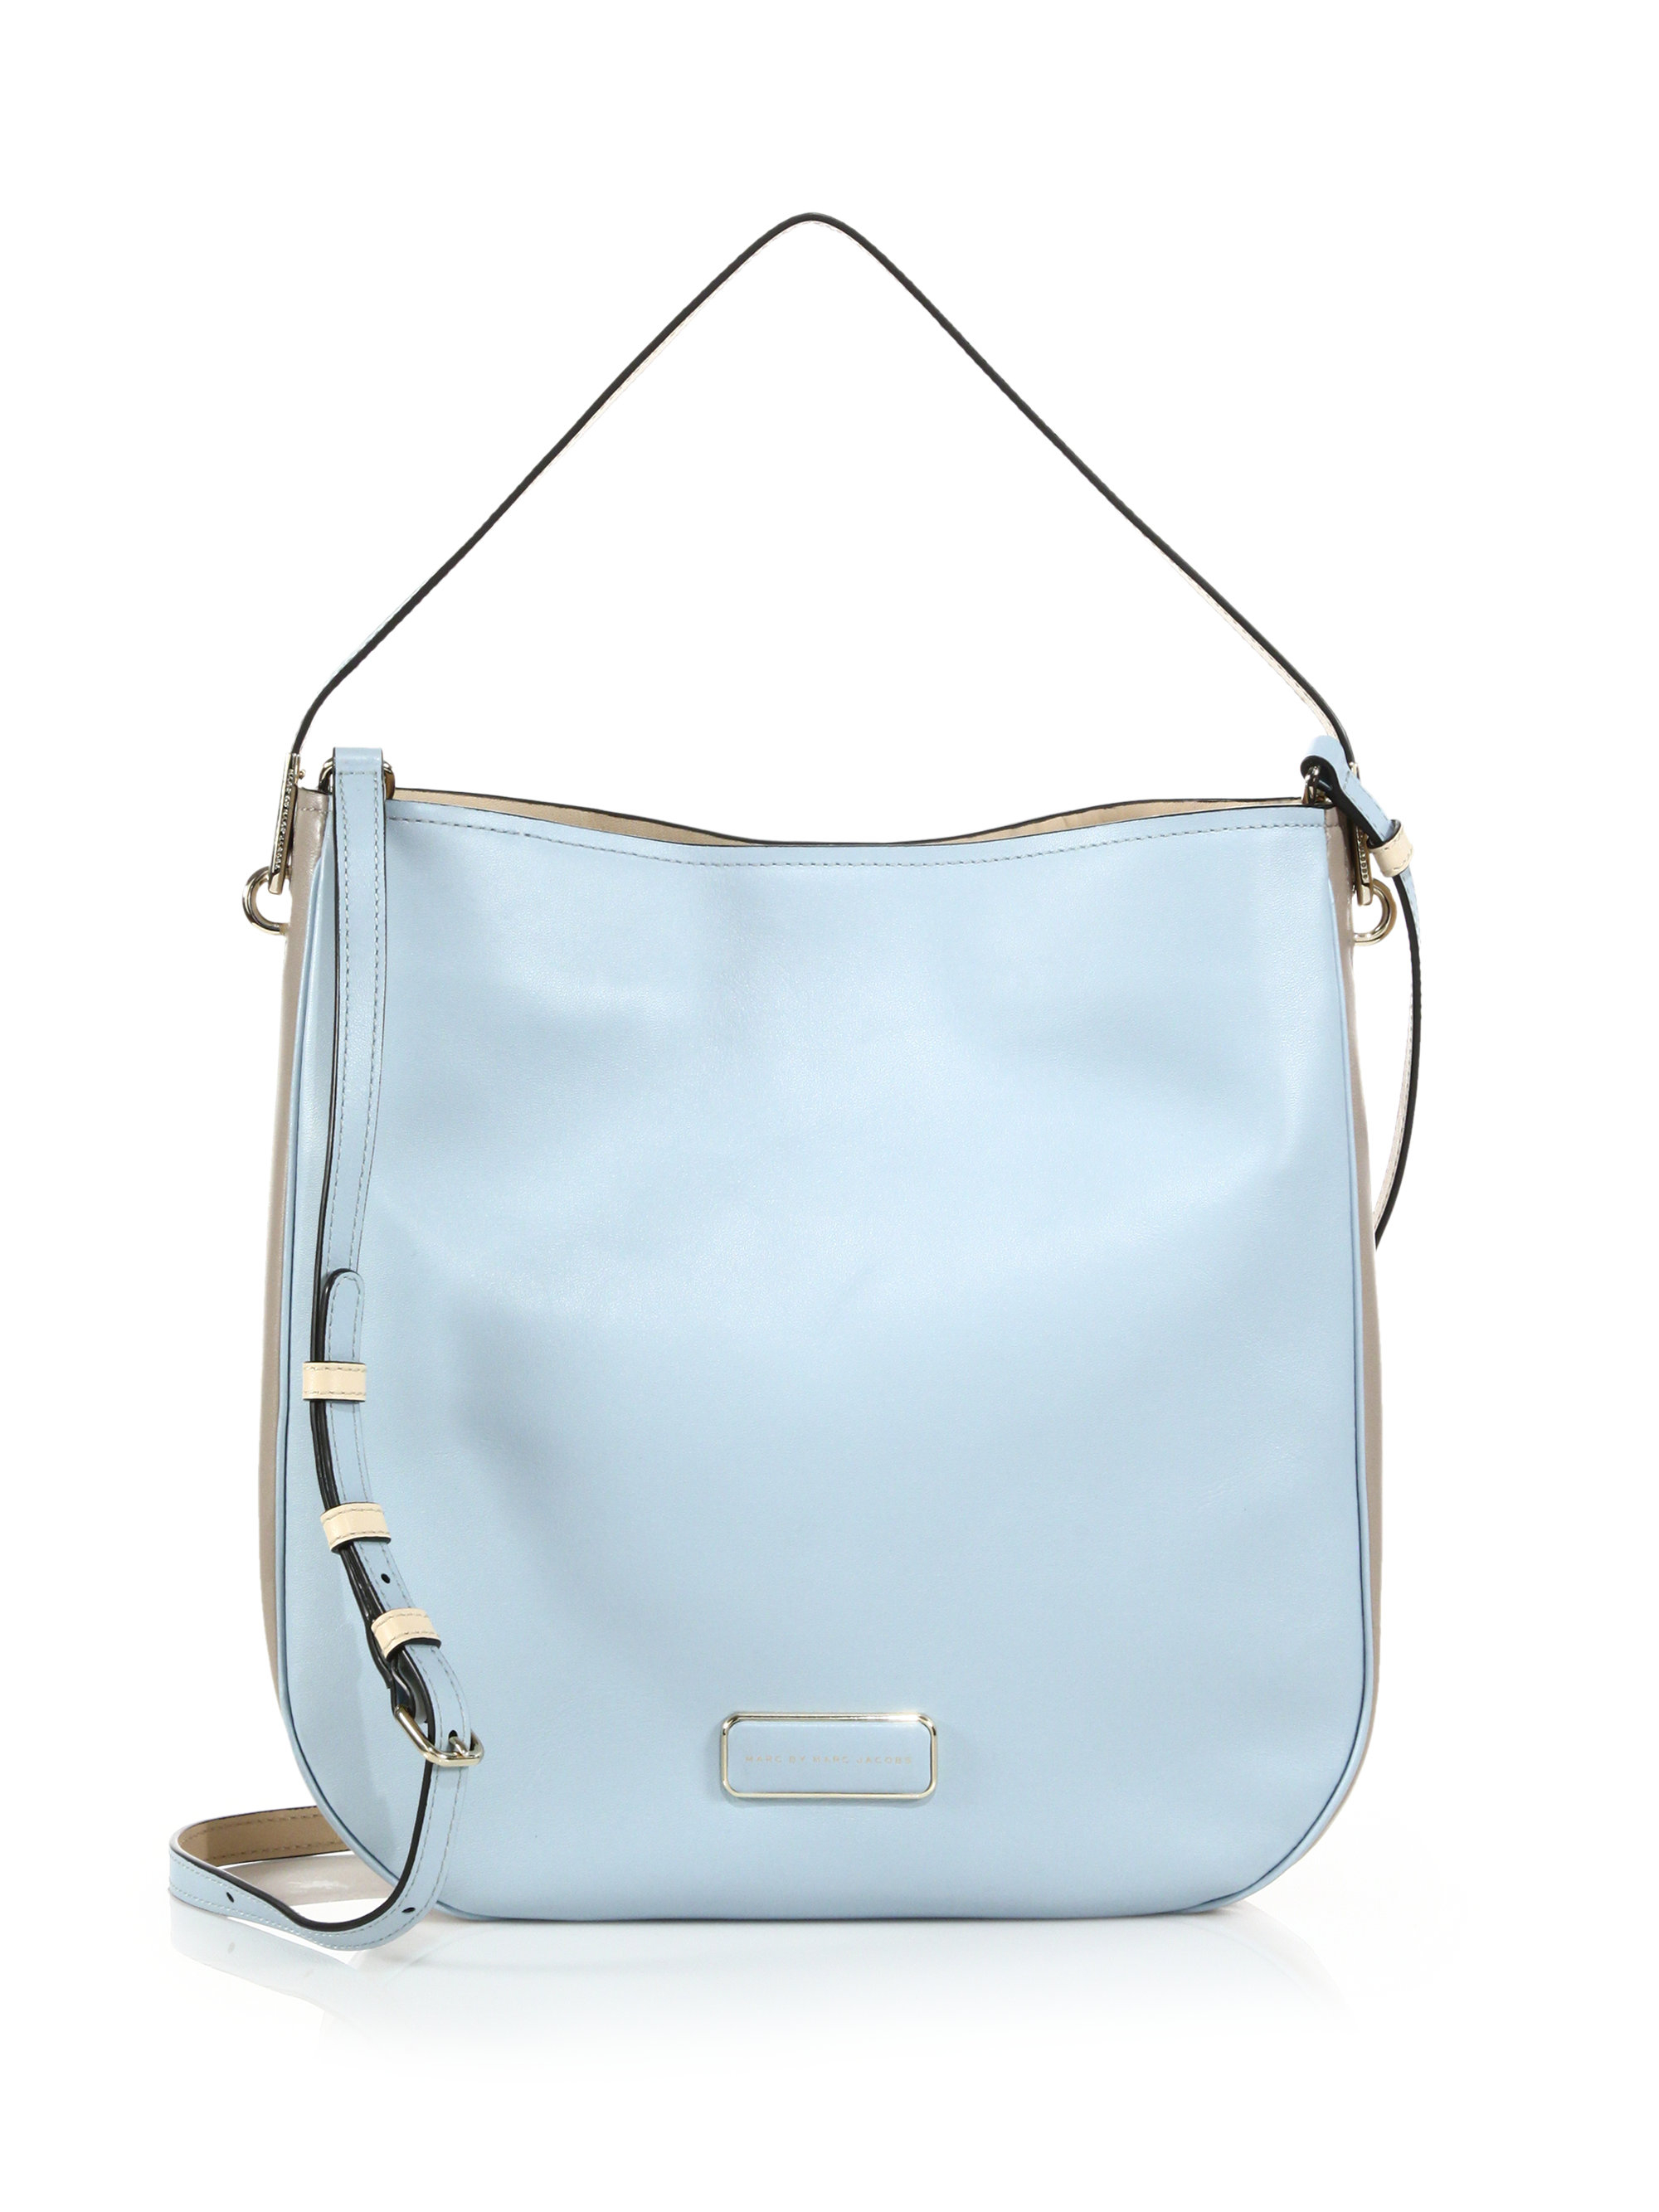 Marc By Marc Jacobs Ligero Two-Tone Leather Hobo Bag in Blue - Lyst